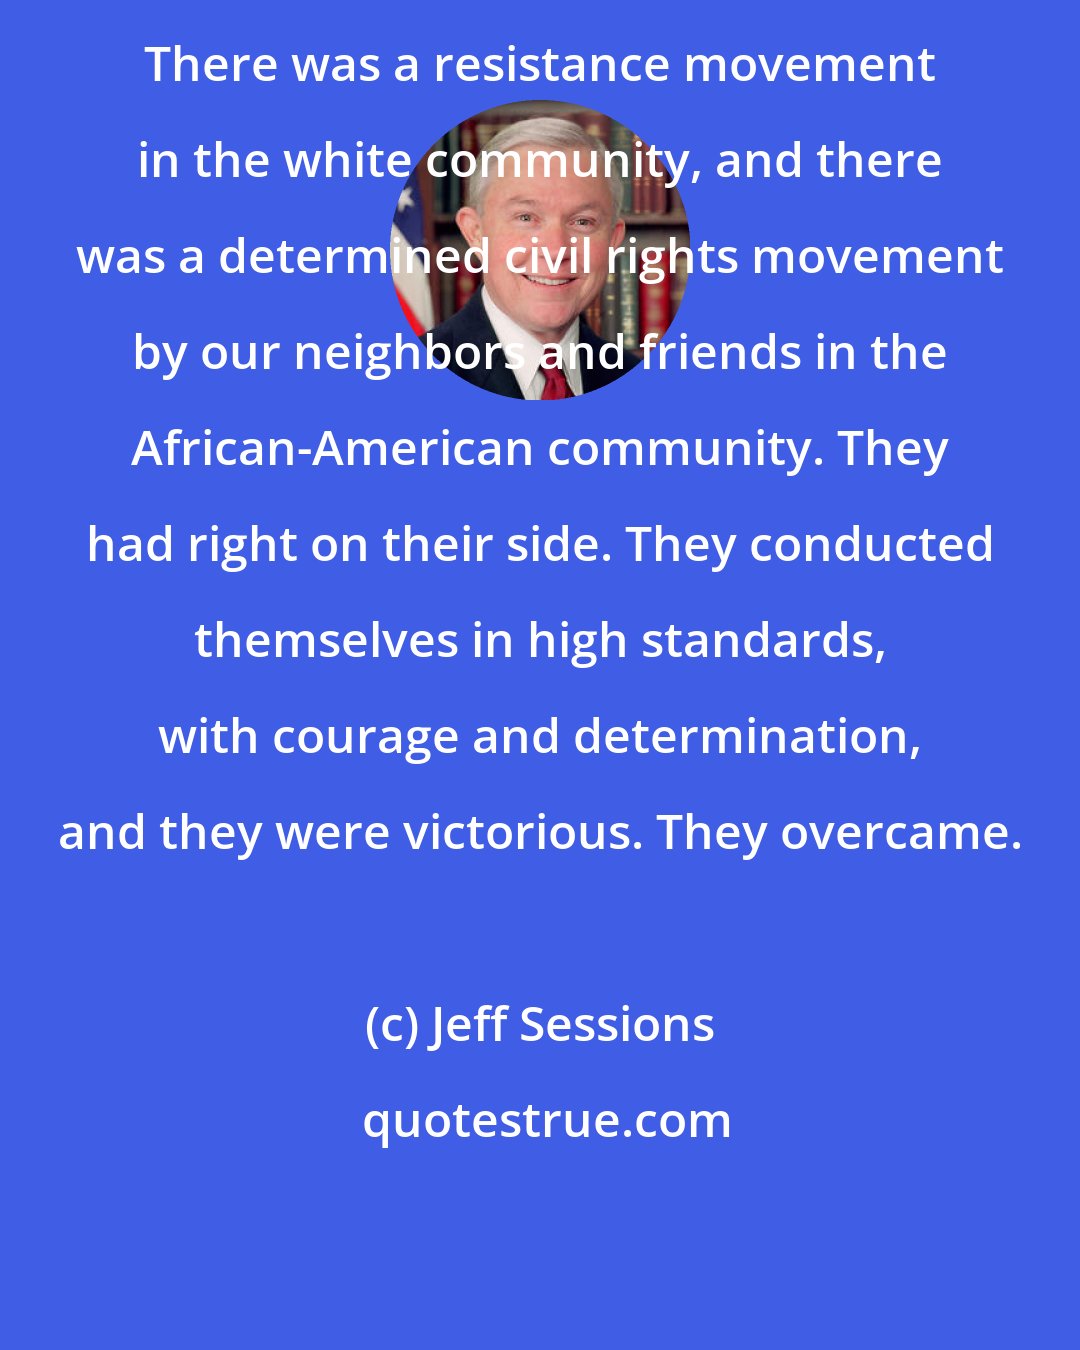 Jeff Sessions: There was a resistance movement in the white community, and there was a determined civil rights movement by our neighbors and friends in the African-American community. They had right on their side. They conducted themselves in high standards, with courage and determination, and they were victorious. They overcame.